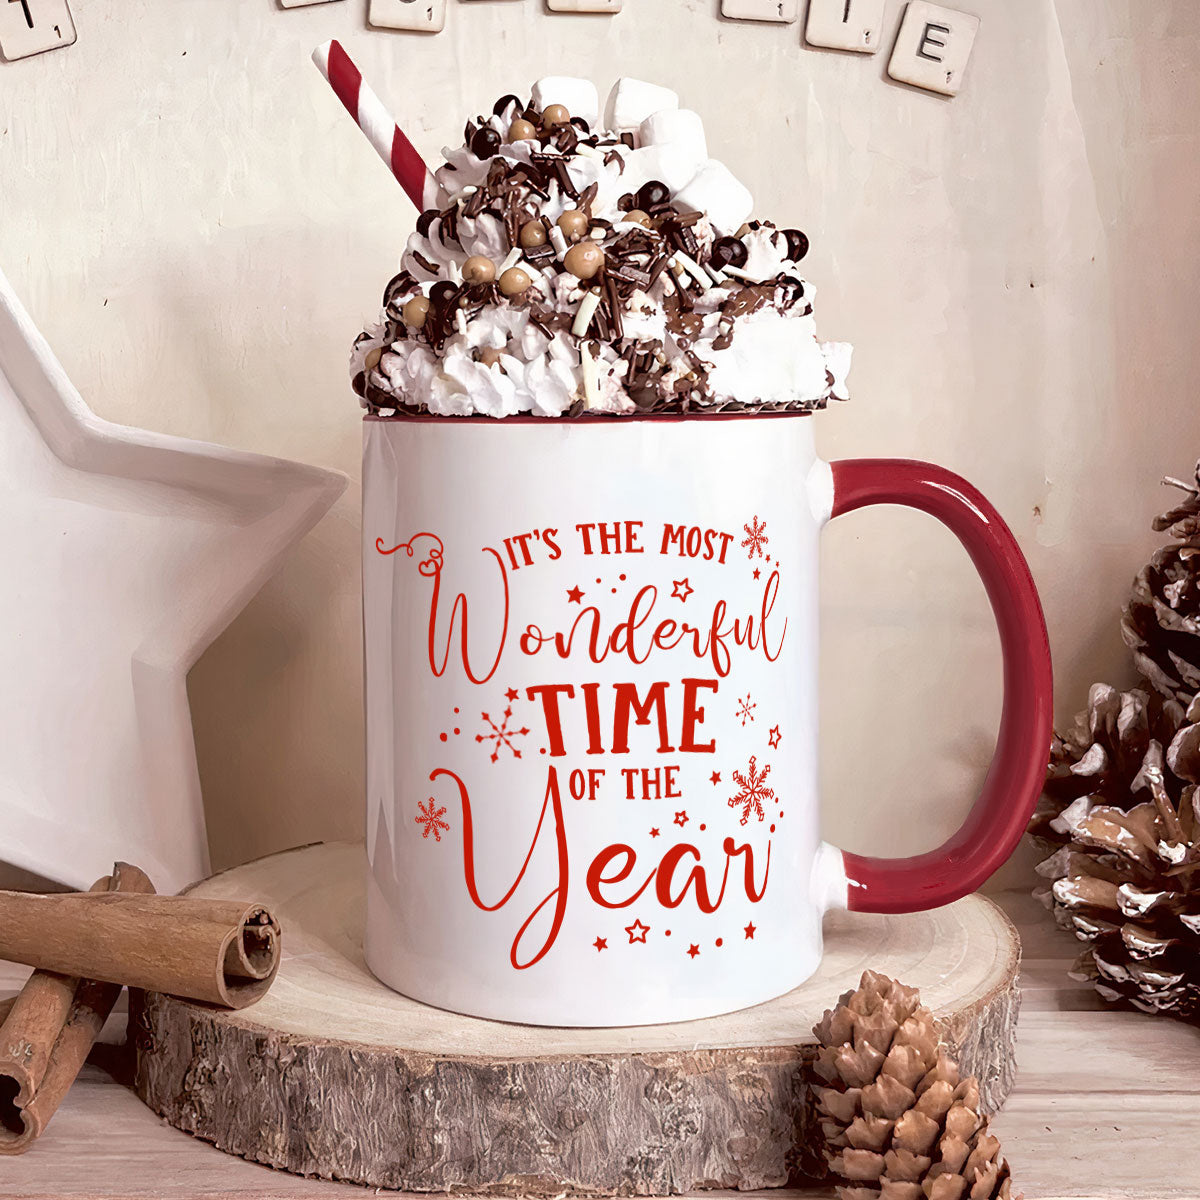 It's The Most Wonderful Time Of The Year - Personalized Accent Mug